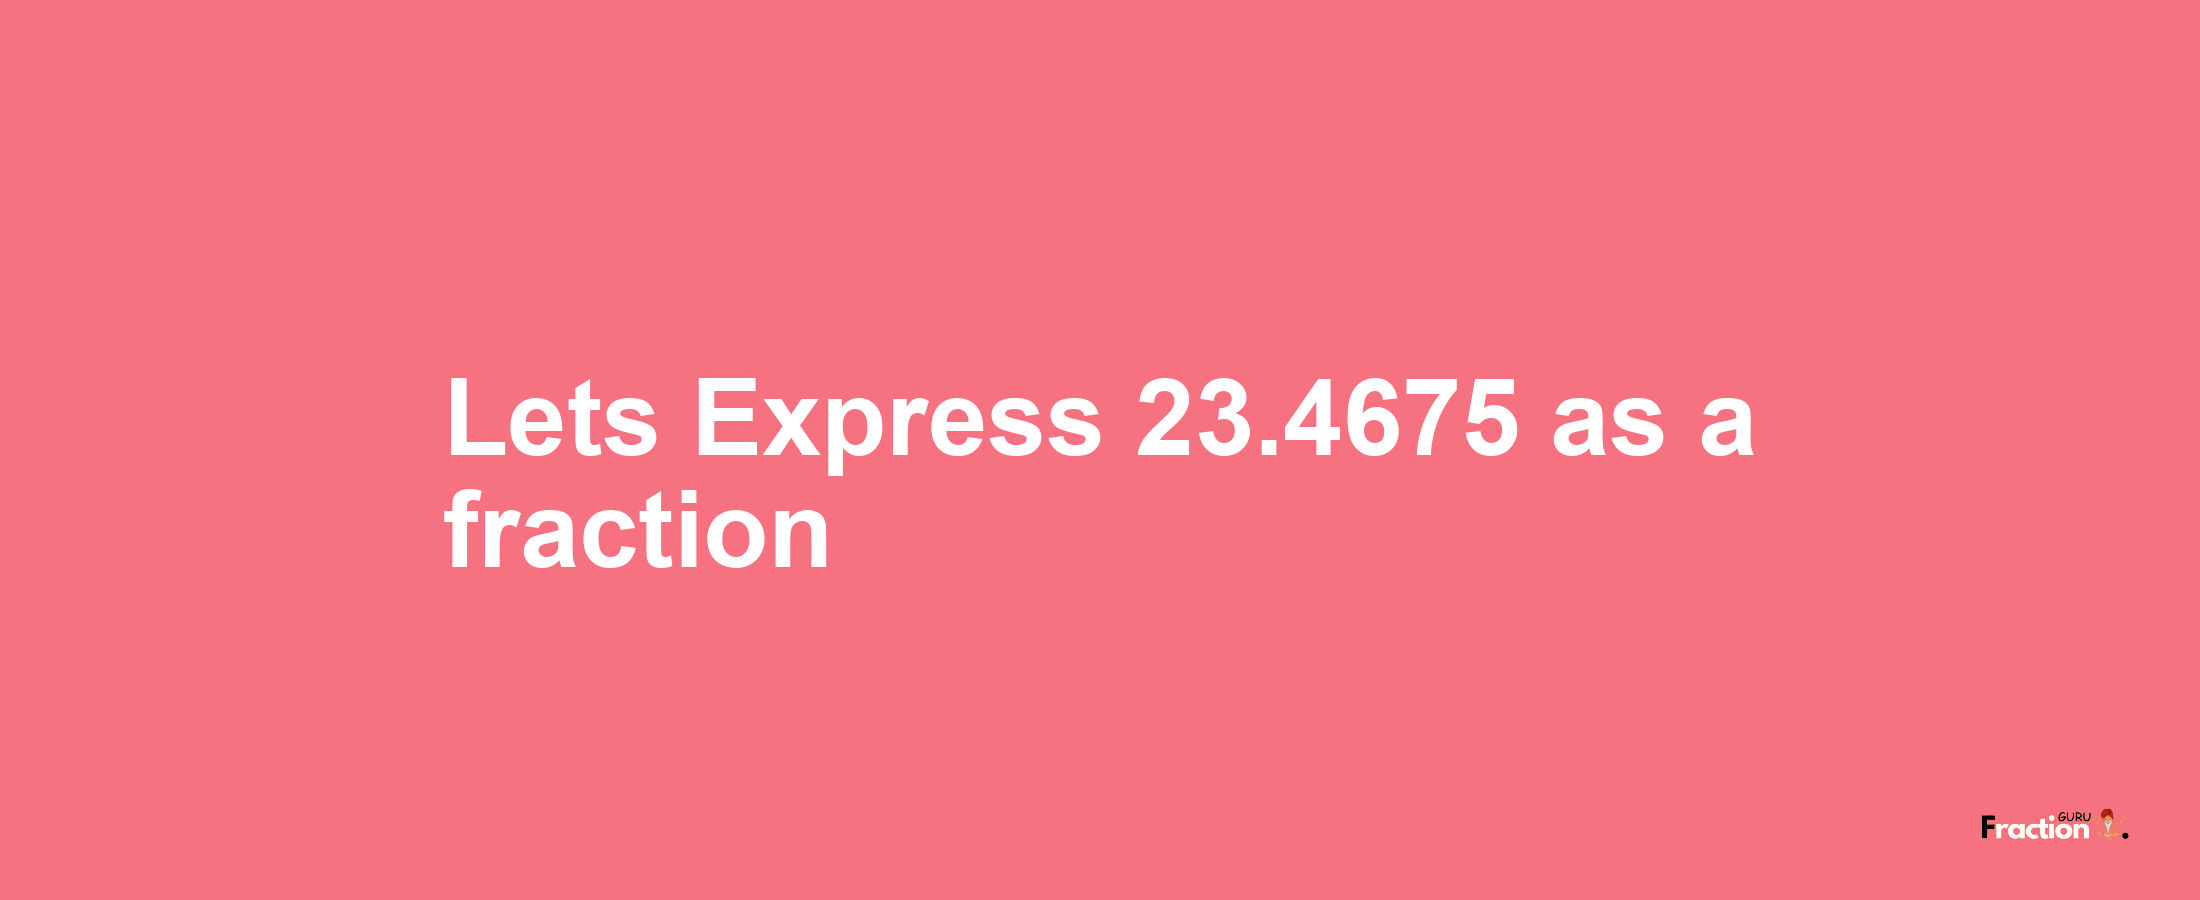 Lets Express 23.4675 as afraction